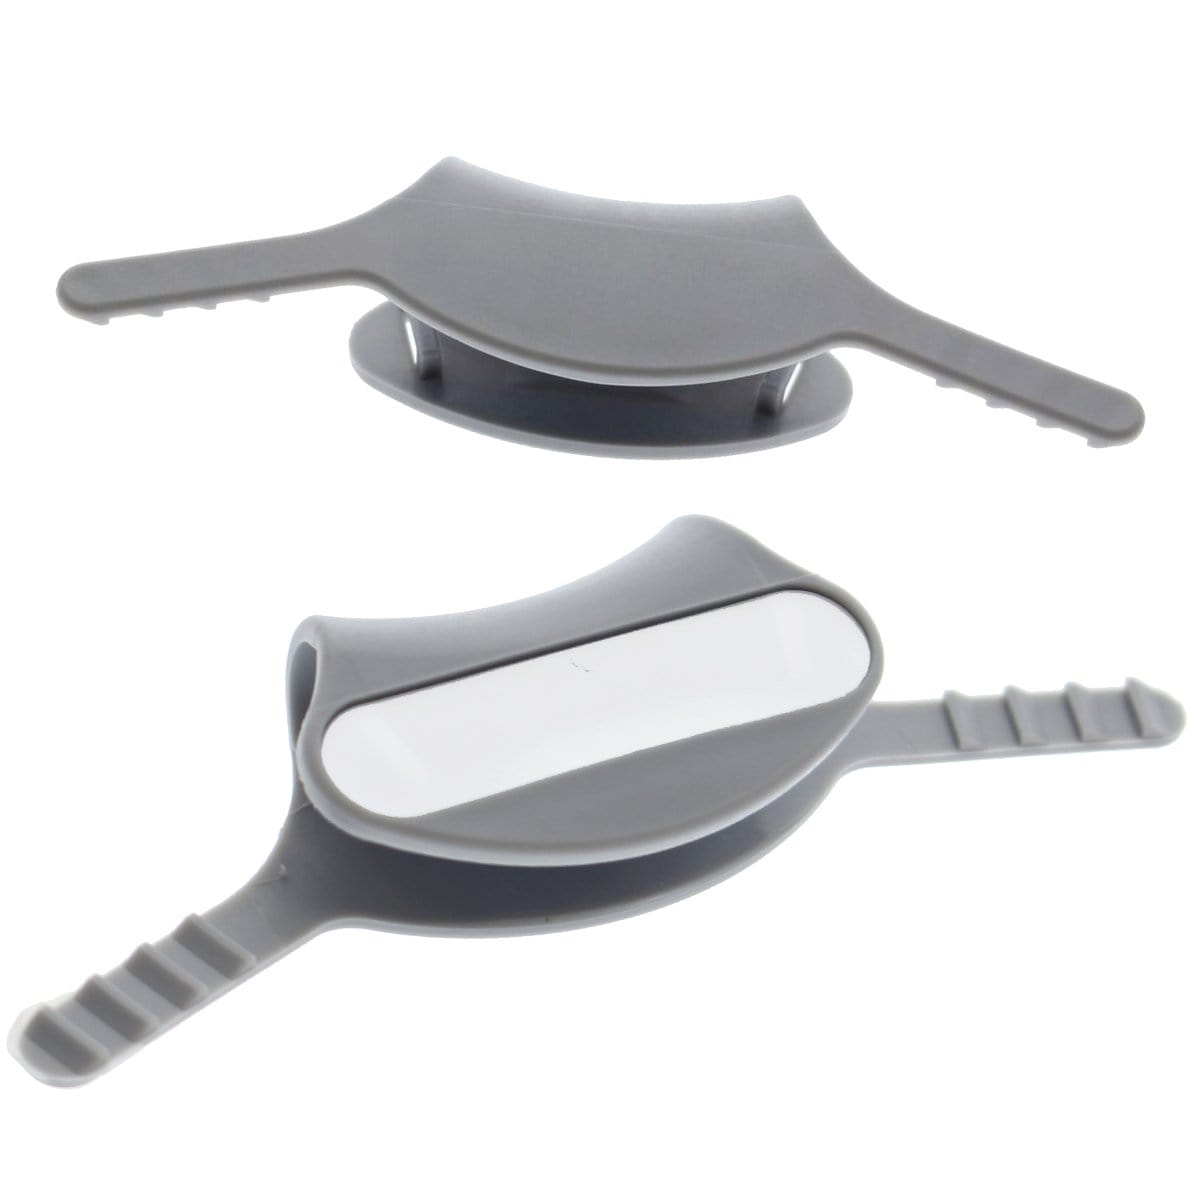 Gray Yoke Stethoscope ID Tags - Blank with Write on Surface (Cardio & Cardiology Compatible) (SPID-9760) SPID-9760-GRAY